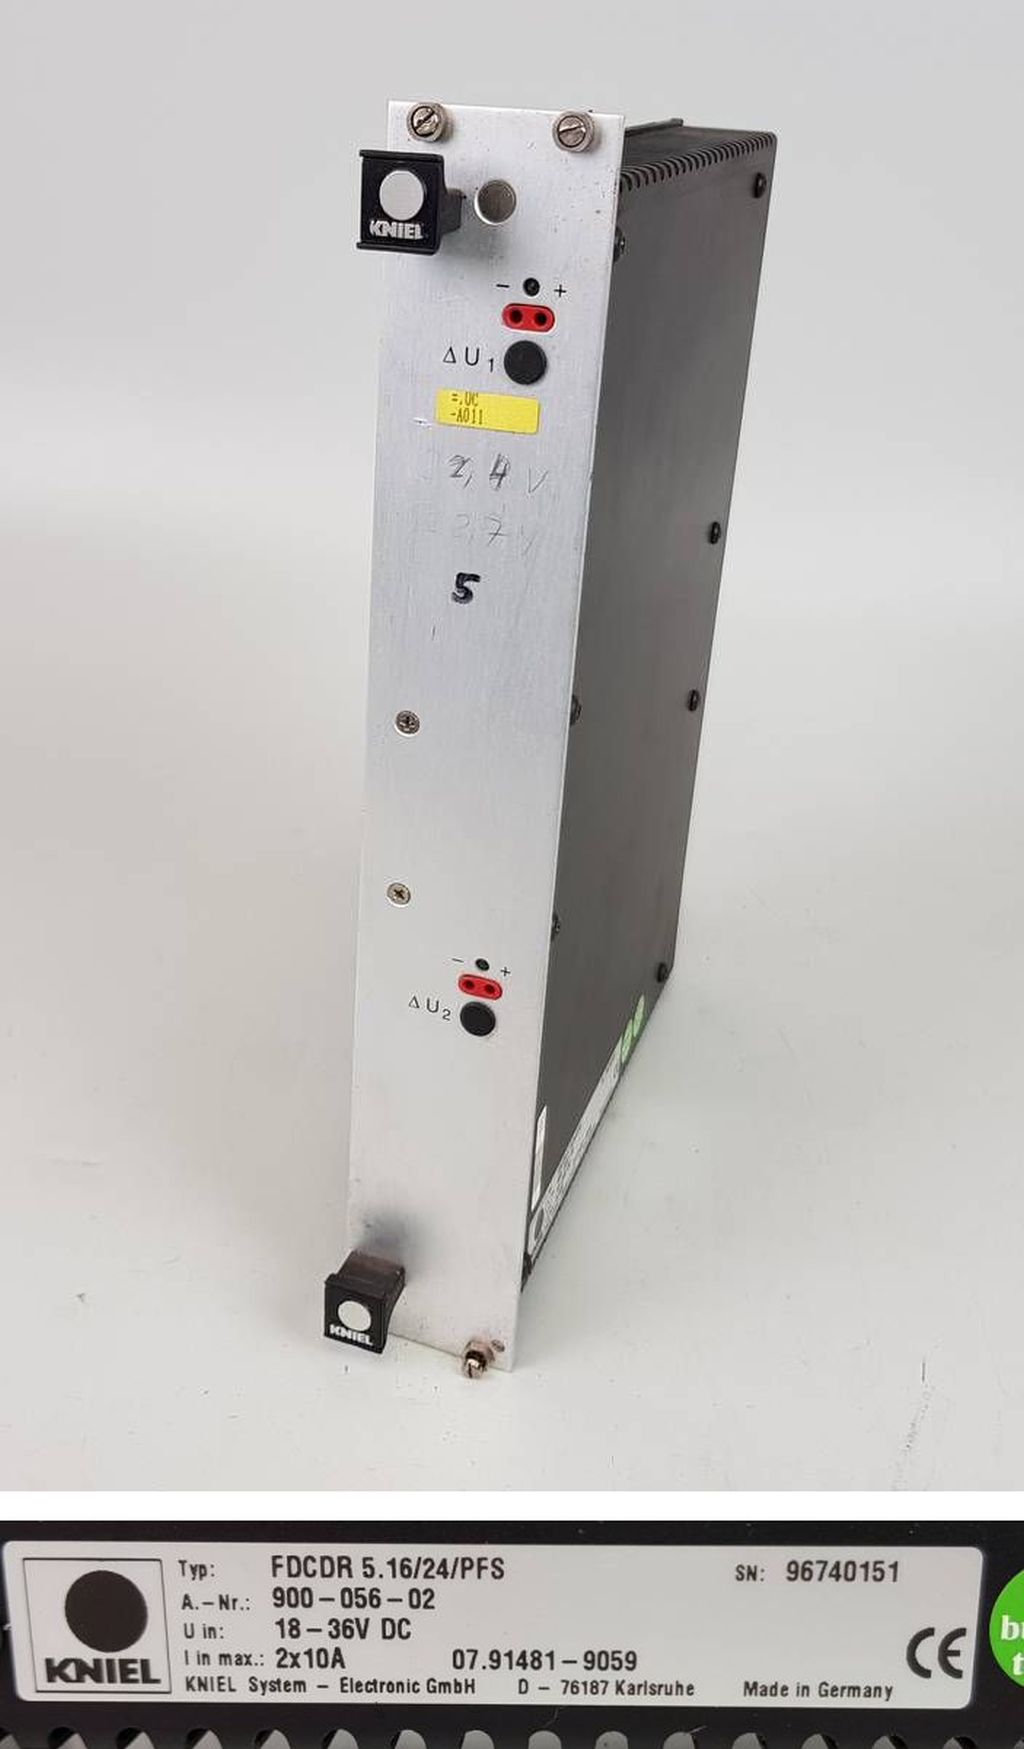 PP4619 Power Supply Kniel FDCDR 5.16/24/PFS 900-056-02 18-36V DC 2x10A